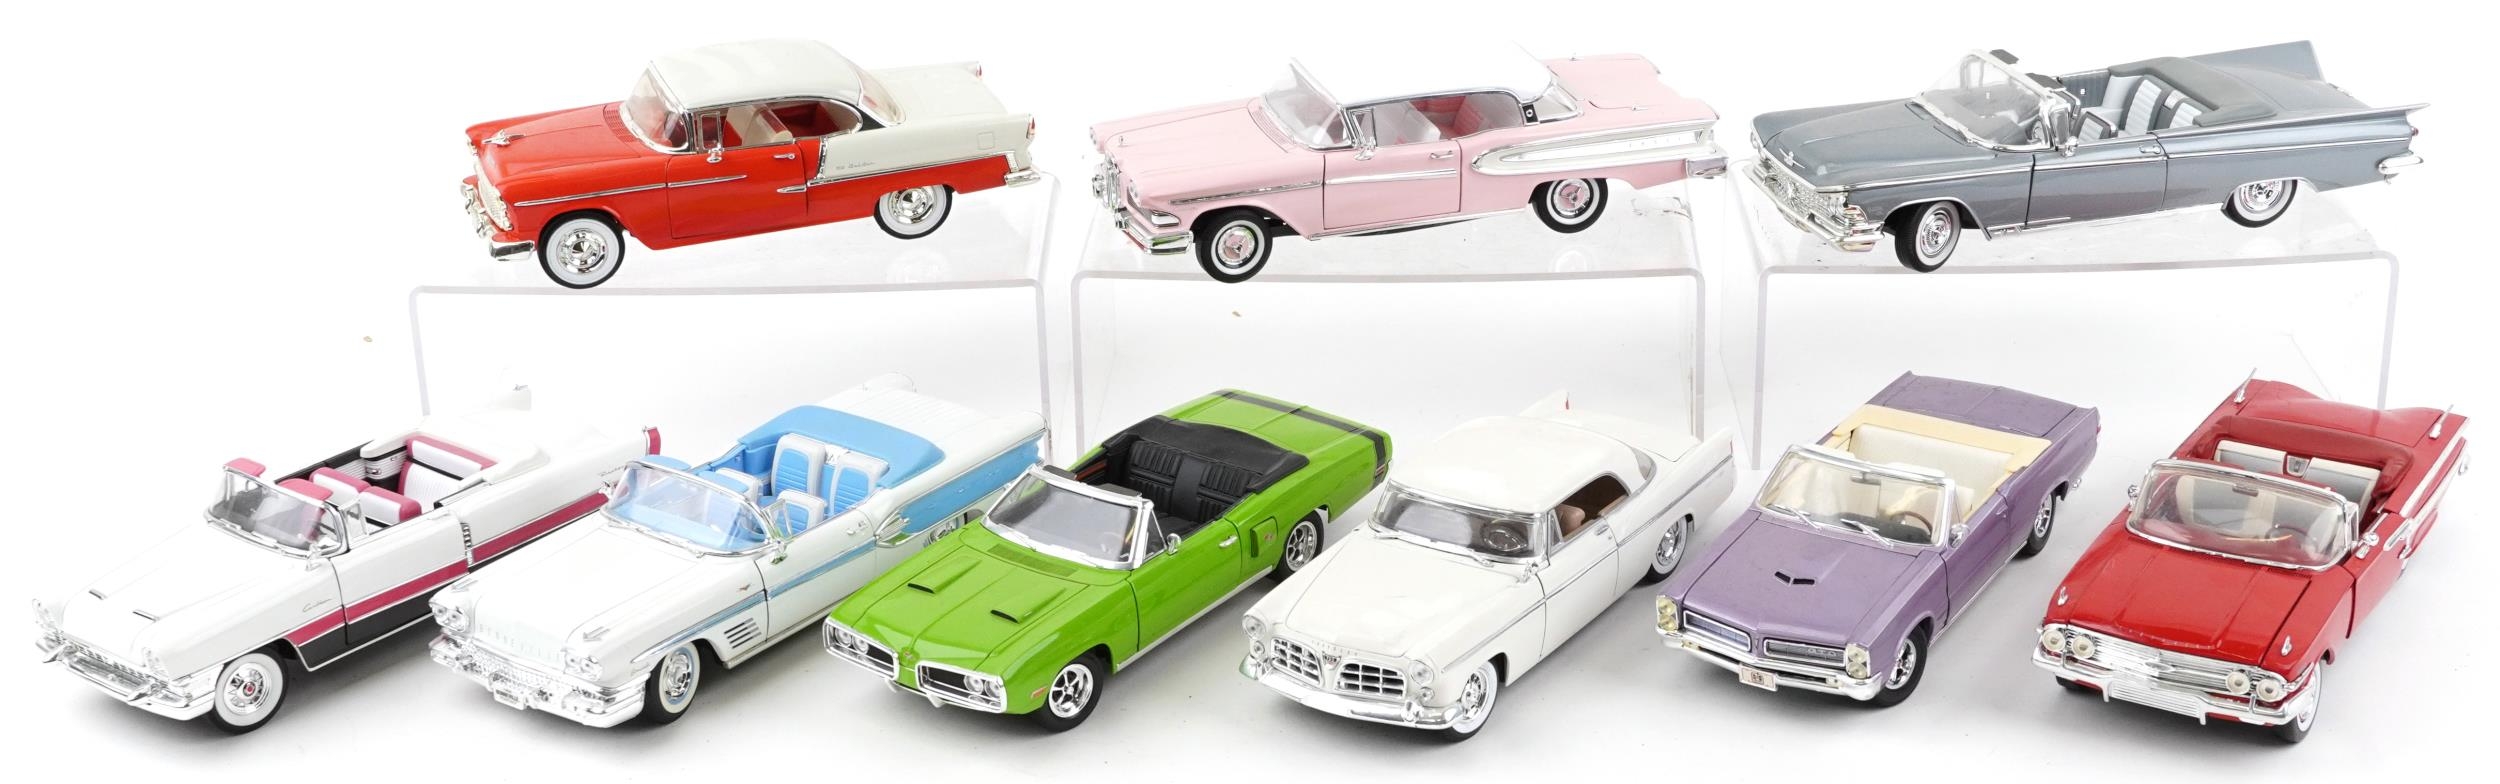 Nine 1:18 scale diecast vehicles including Ertl Chevrolet Bel Air, Road Signature 1959 Buick Electra